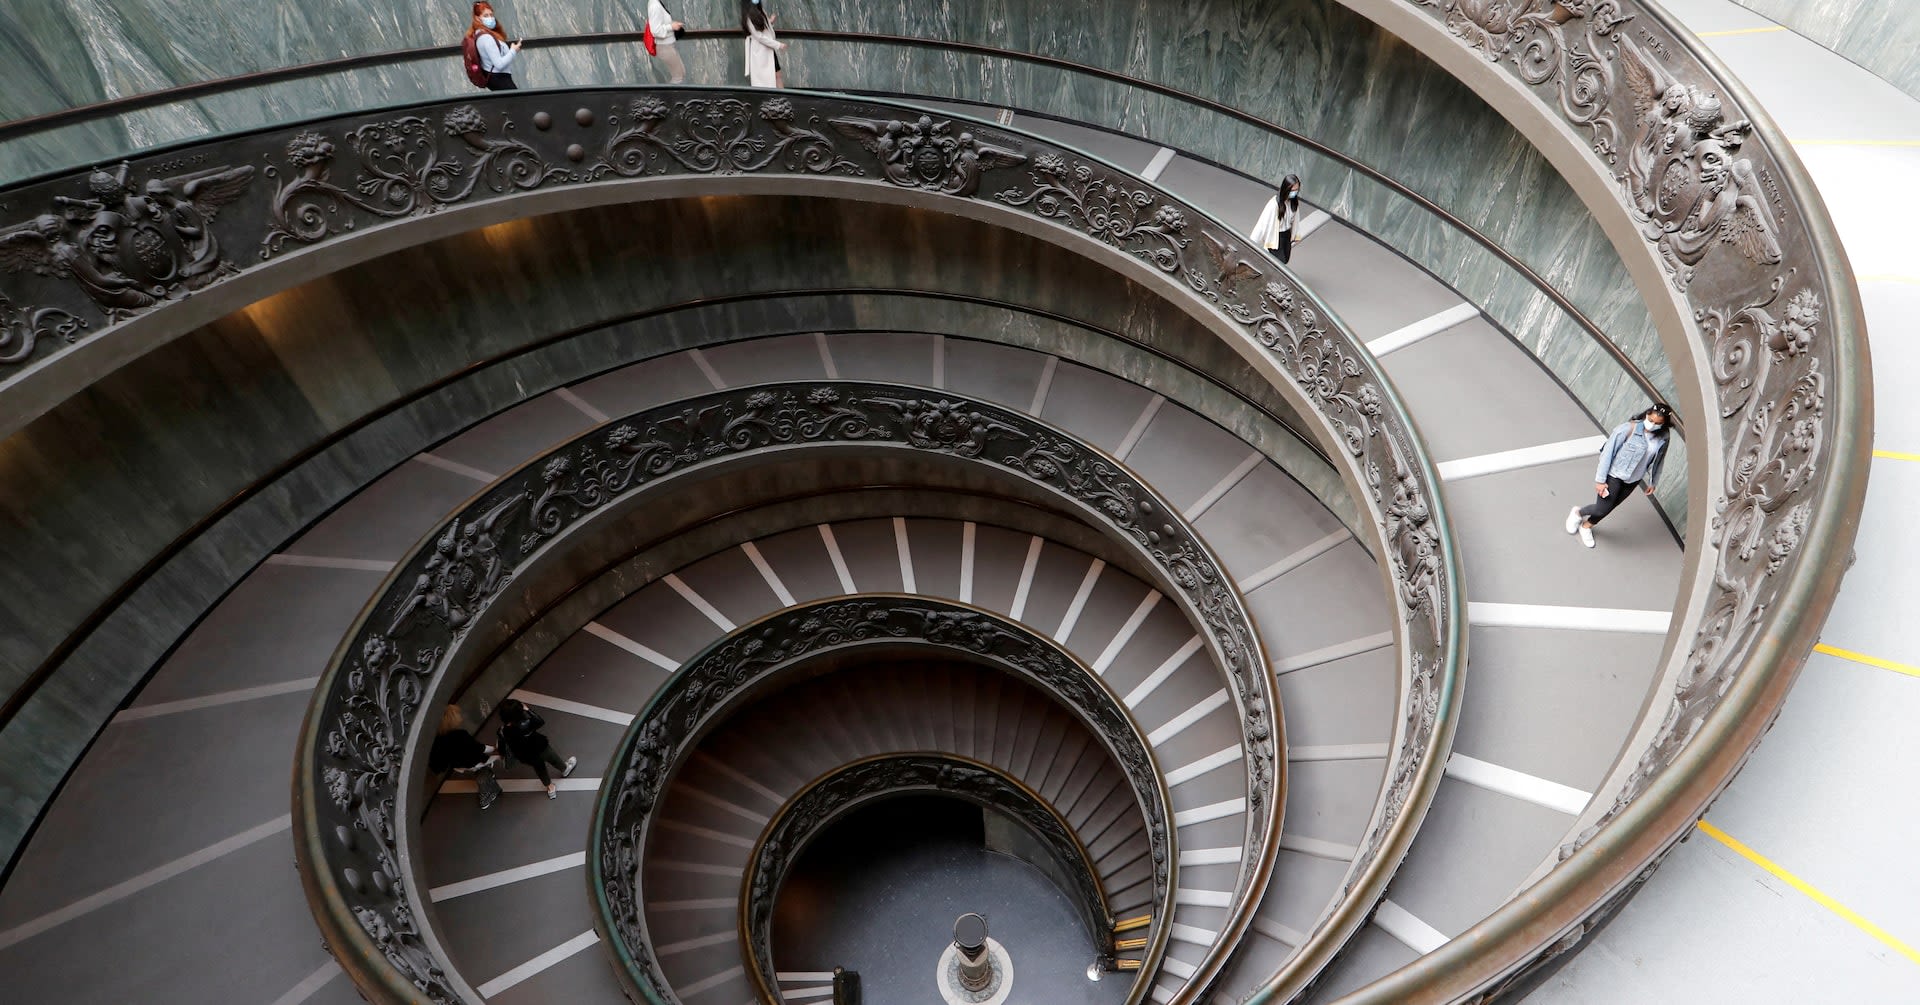 Vatican Museums staff start unprecedented legal action over labour conditions